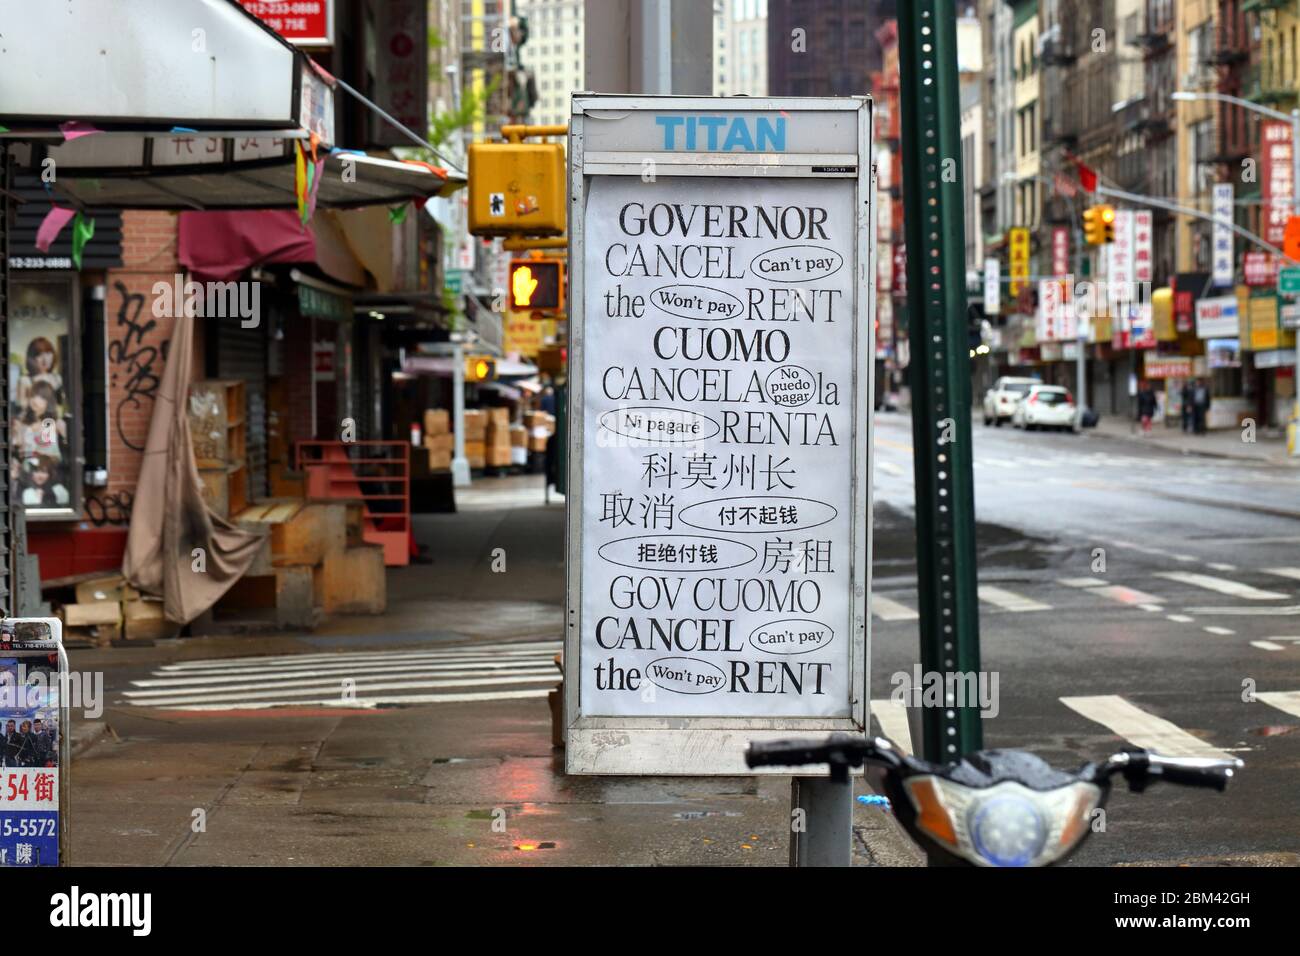 A 'Cancel Rent Cuomo' poster inside a telephone booth in Manhattan Chinatown in New York during coronavirus... SEE MORE INFO FOR FULL CAPTION Stock Photo